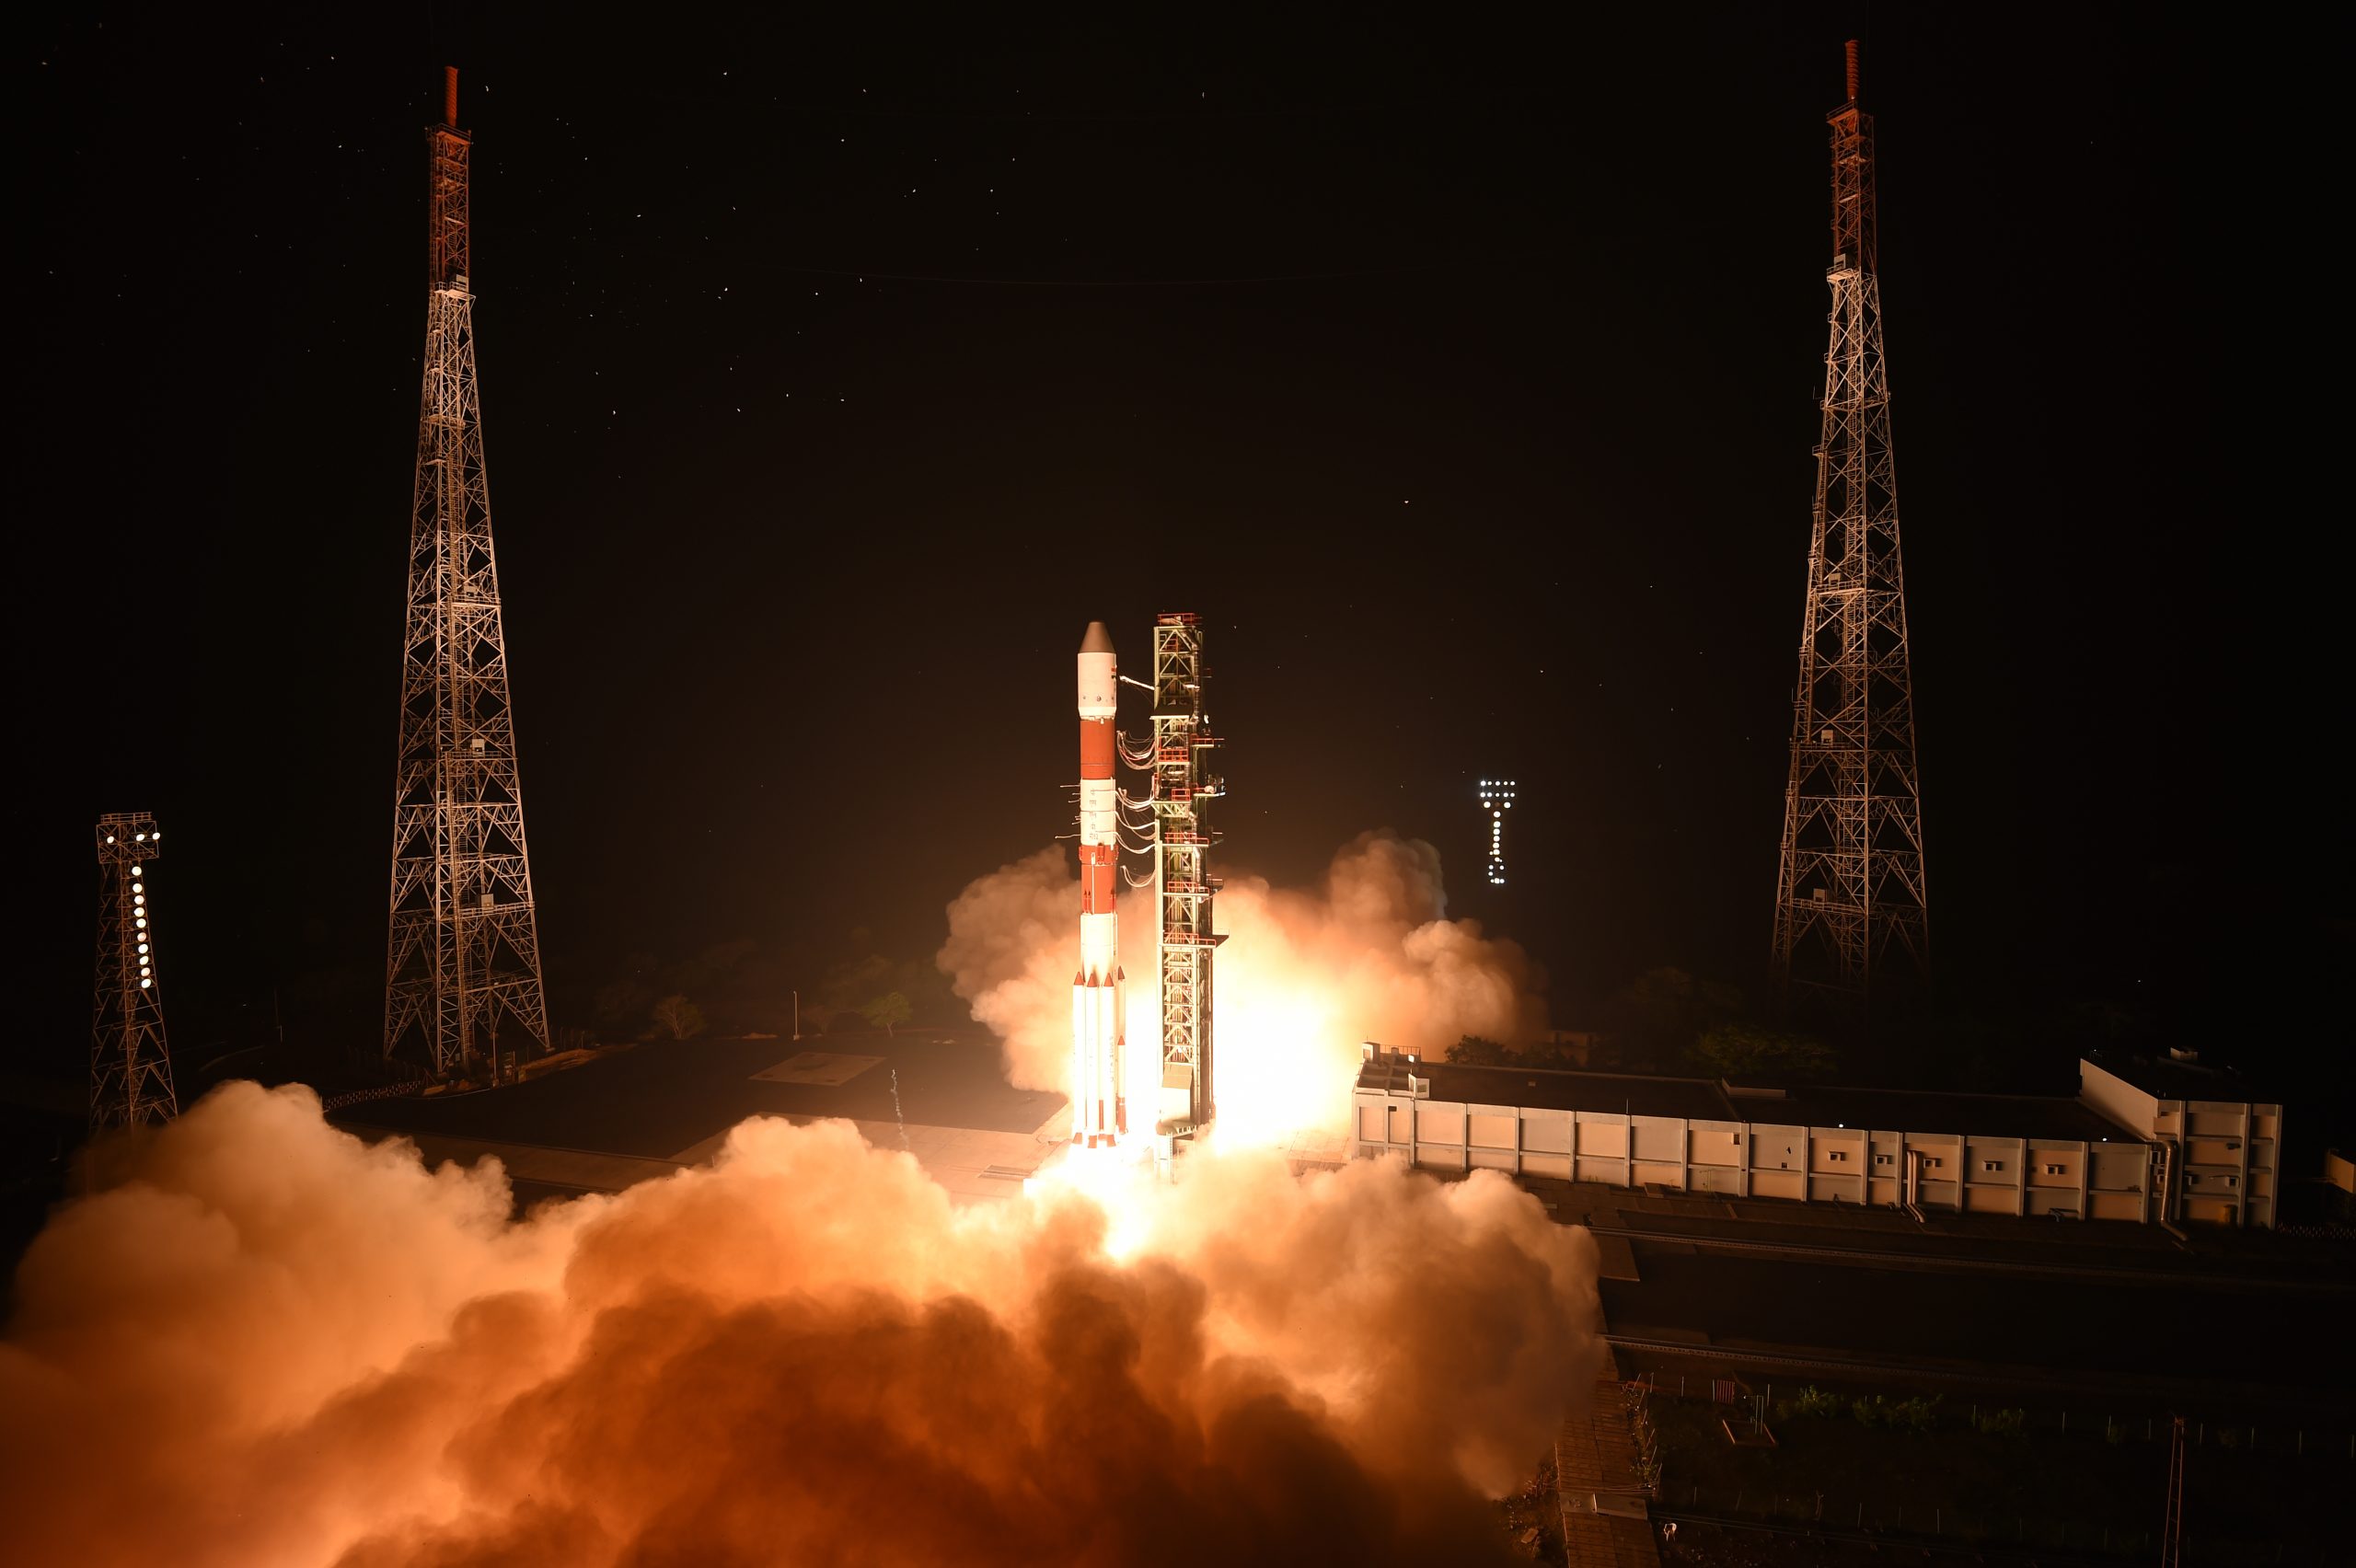 ISRO Successfully launches PSLV-C52 with EOS-04 Satellite from Satish Dhawan Space Centre, SHAR, Sriharikota